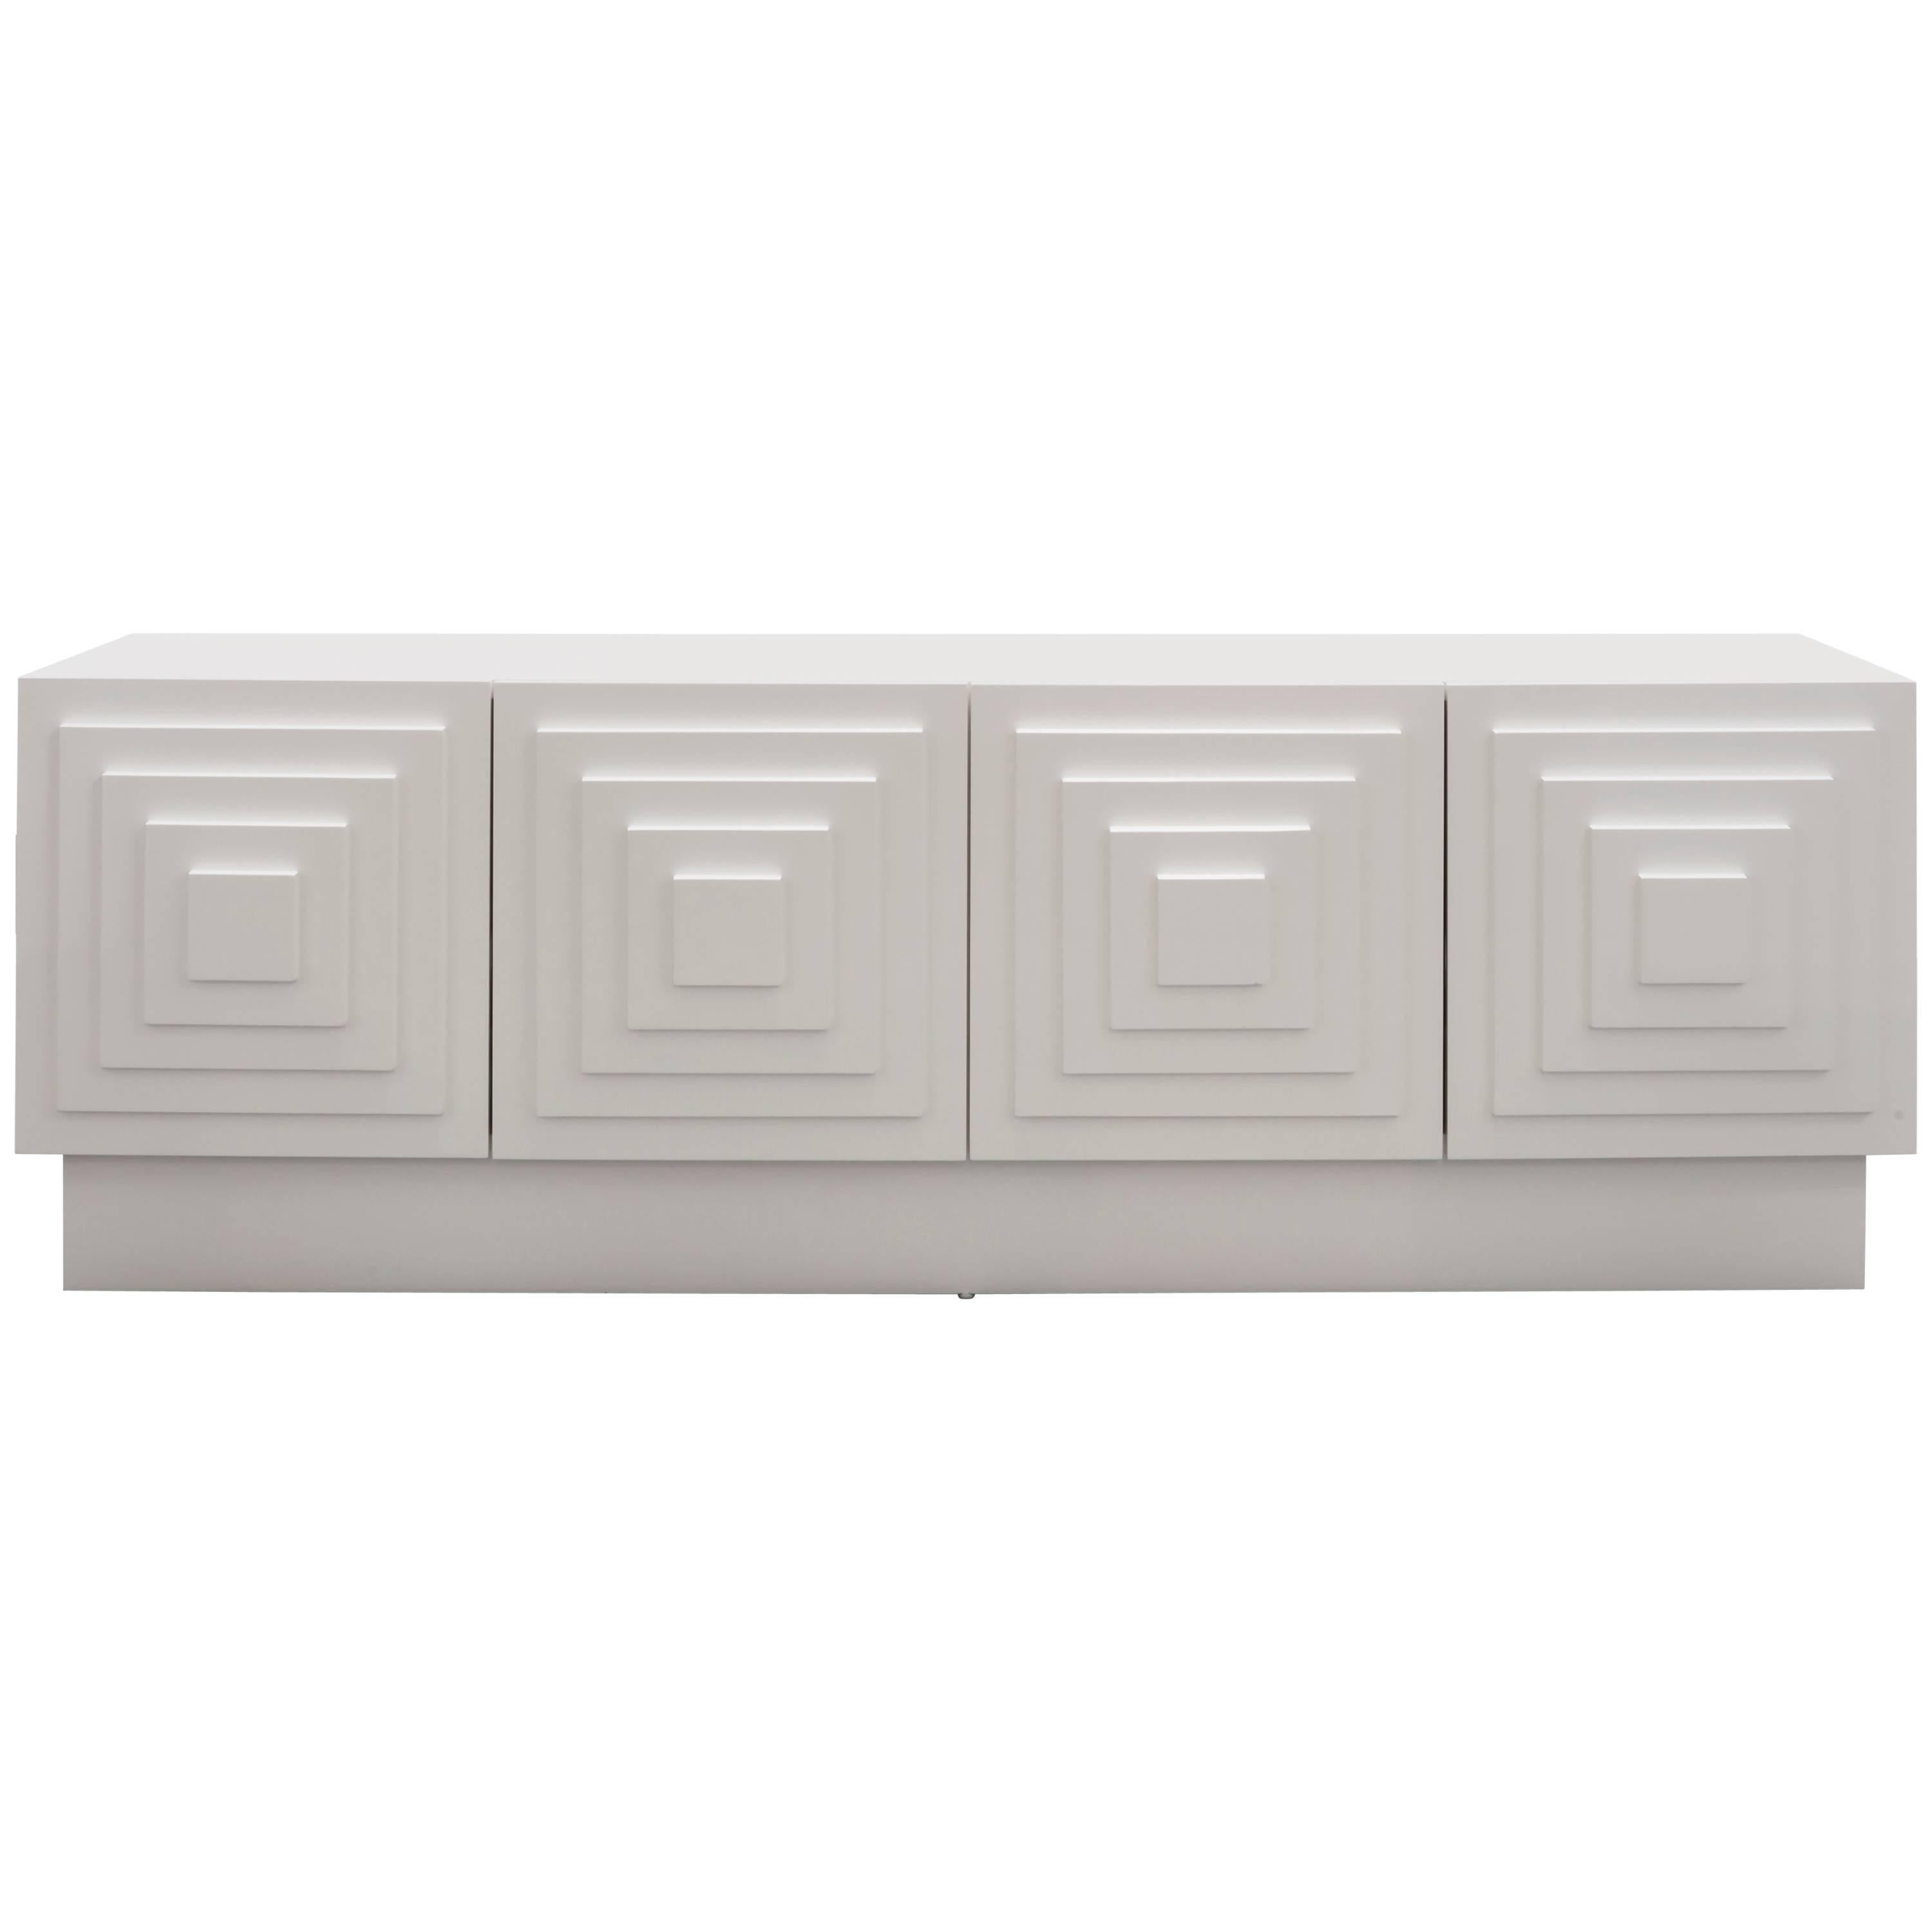 GAULTIER MEDIA CREDENZA - Modern Geometric Cabinet in White Lacquer For Sale